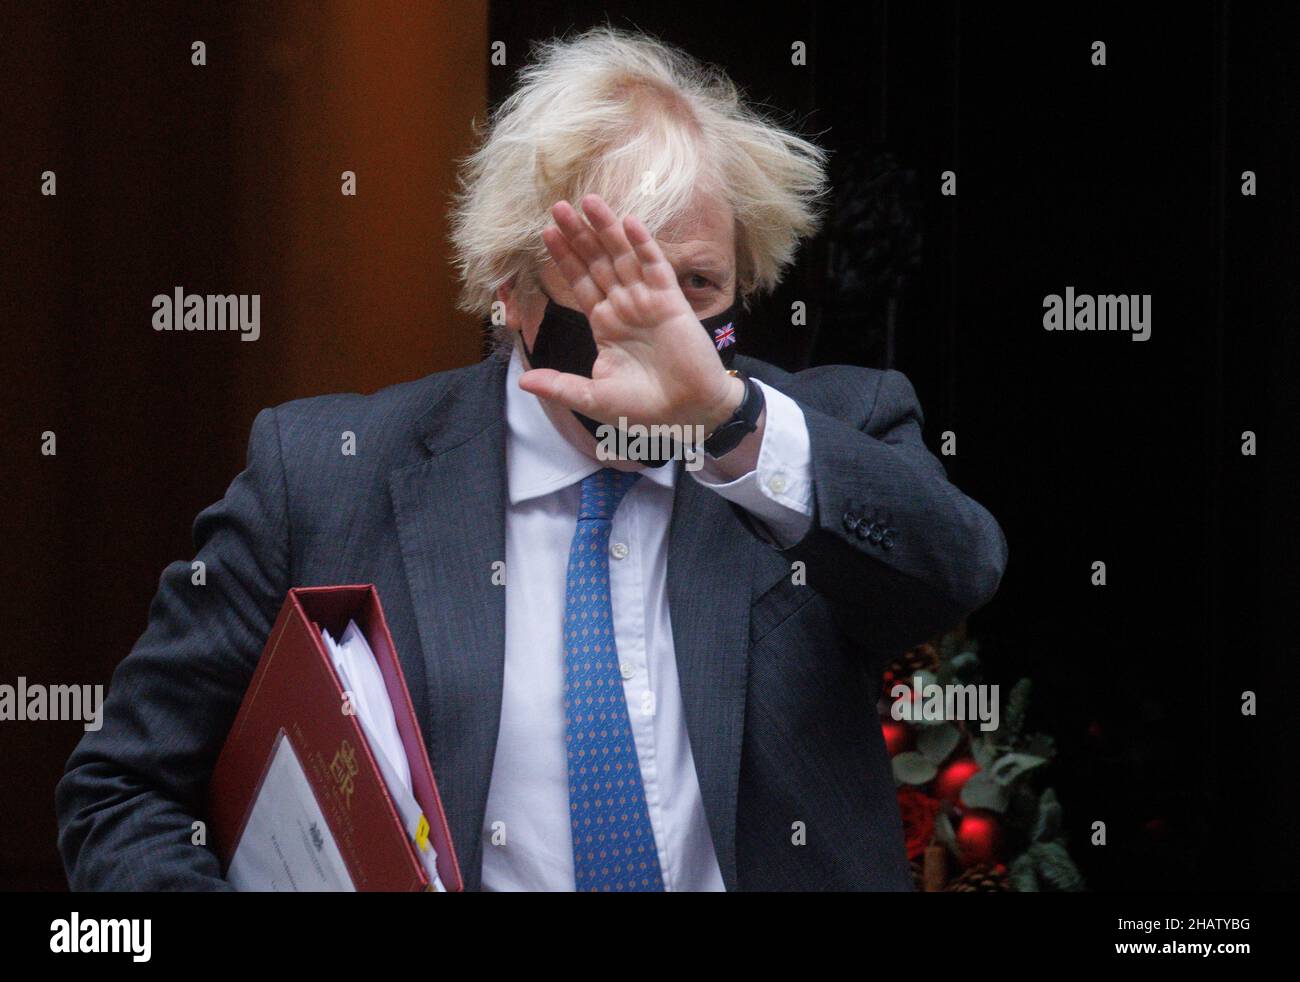 London, UK. 15th Dec, 2021. Prime Minister, Boris Johnson, leaves 10 Downing Street to go to Parliament for Prime Minister's Questions. He will face Keir Starmer over the despatch box where he will face continued questions about the alleged Christmas party at Downing Street. Credit: Tommy London/Alamy Live News Stock Photo